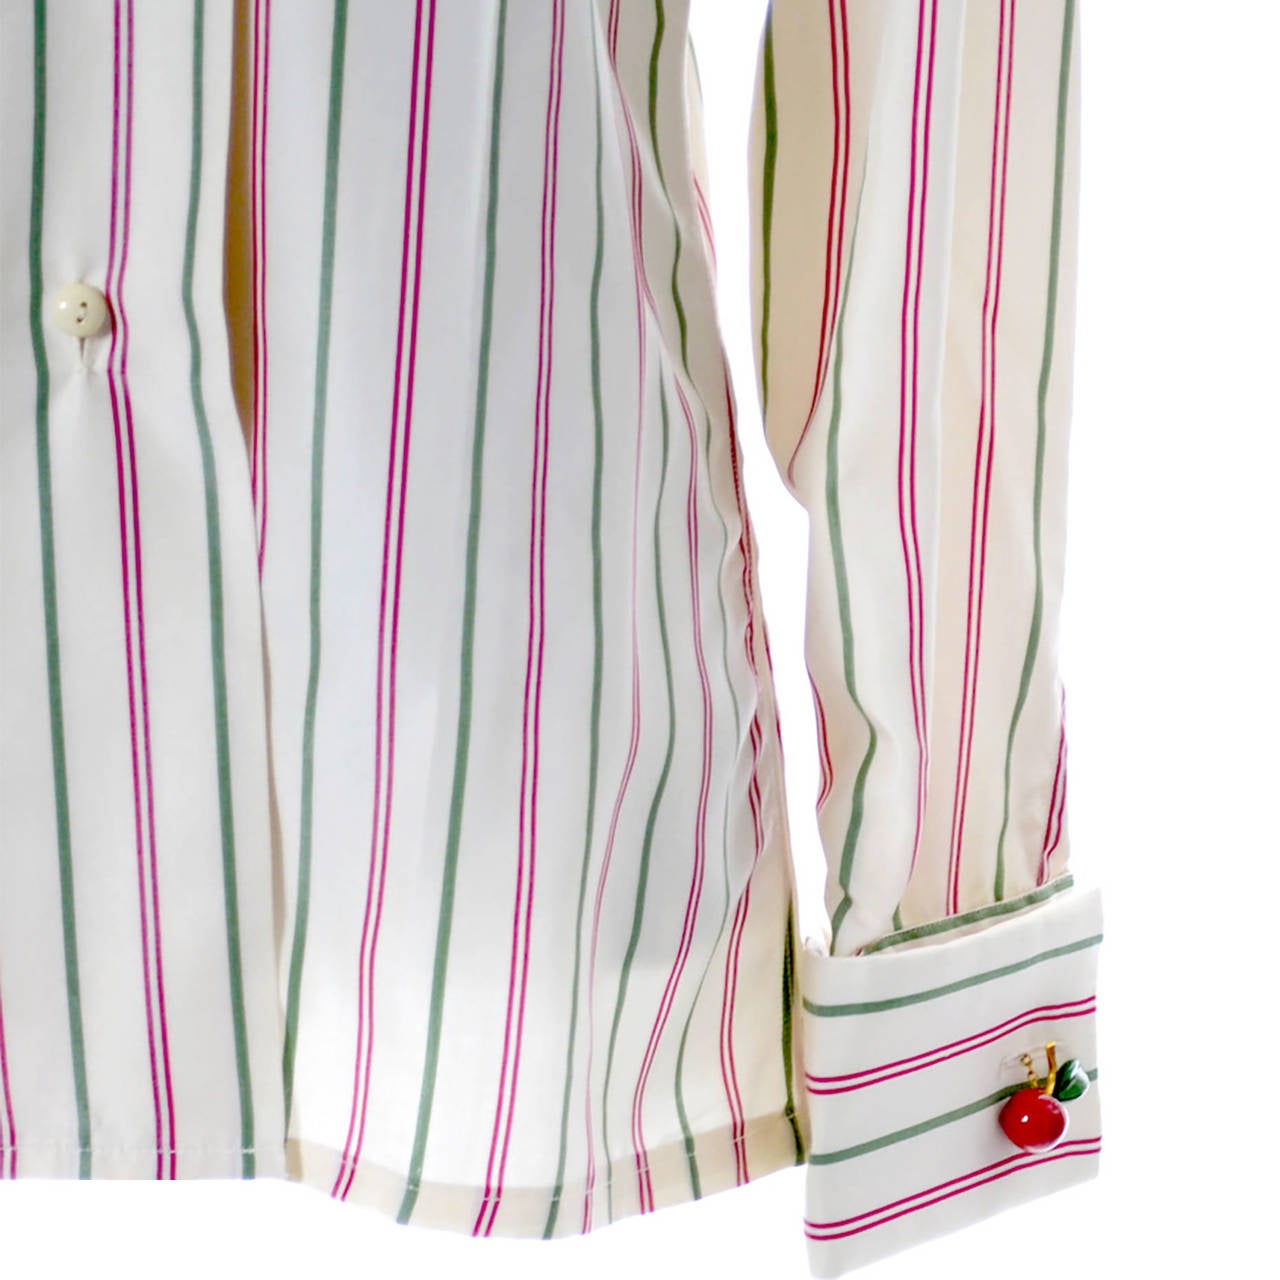 This fabulous striped silk Valentino blouse was made in Italy in the early 1970's. It has buttons up the front and nice french cuffs. Leave it to Mr. Valentino to design the perfect metal red cherry cufflinks with the V logo to go with it! This is